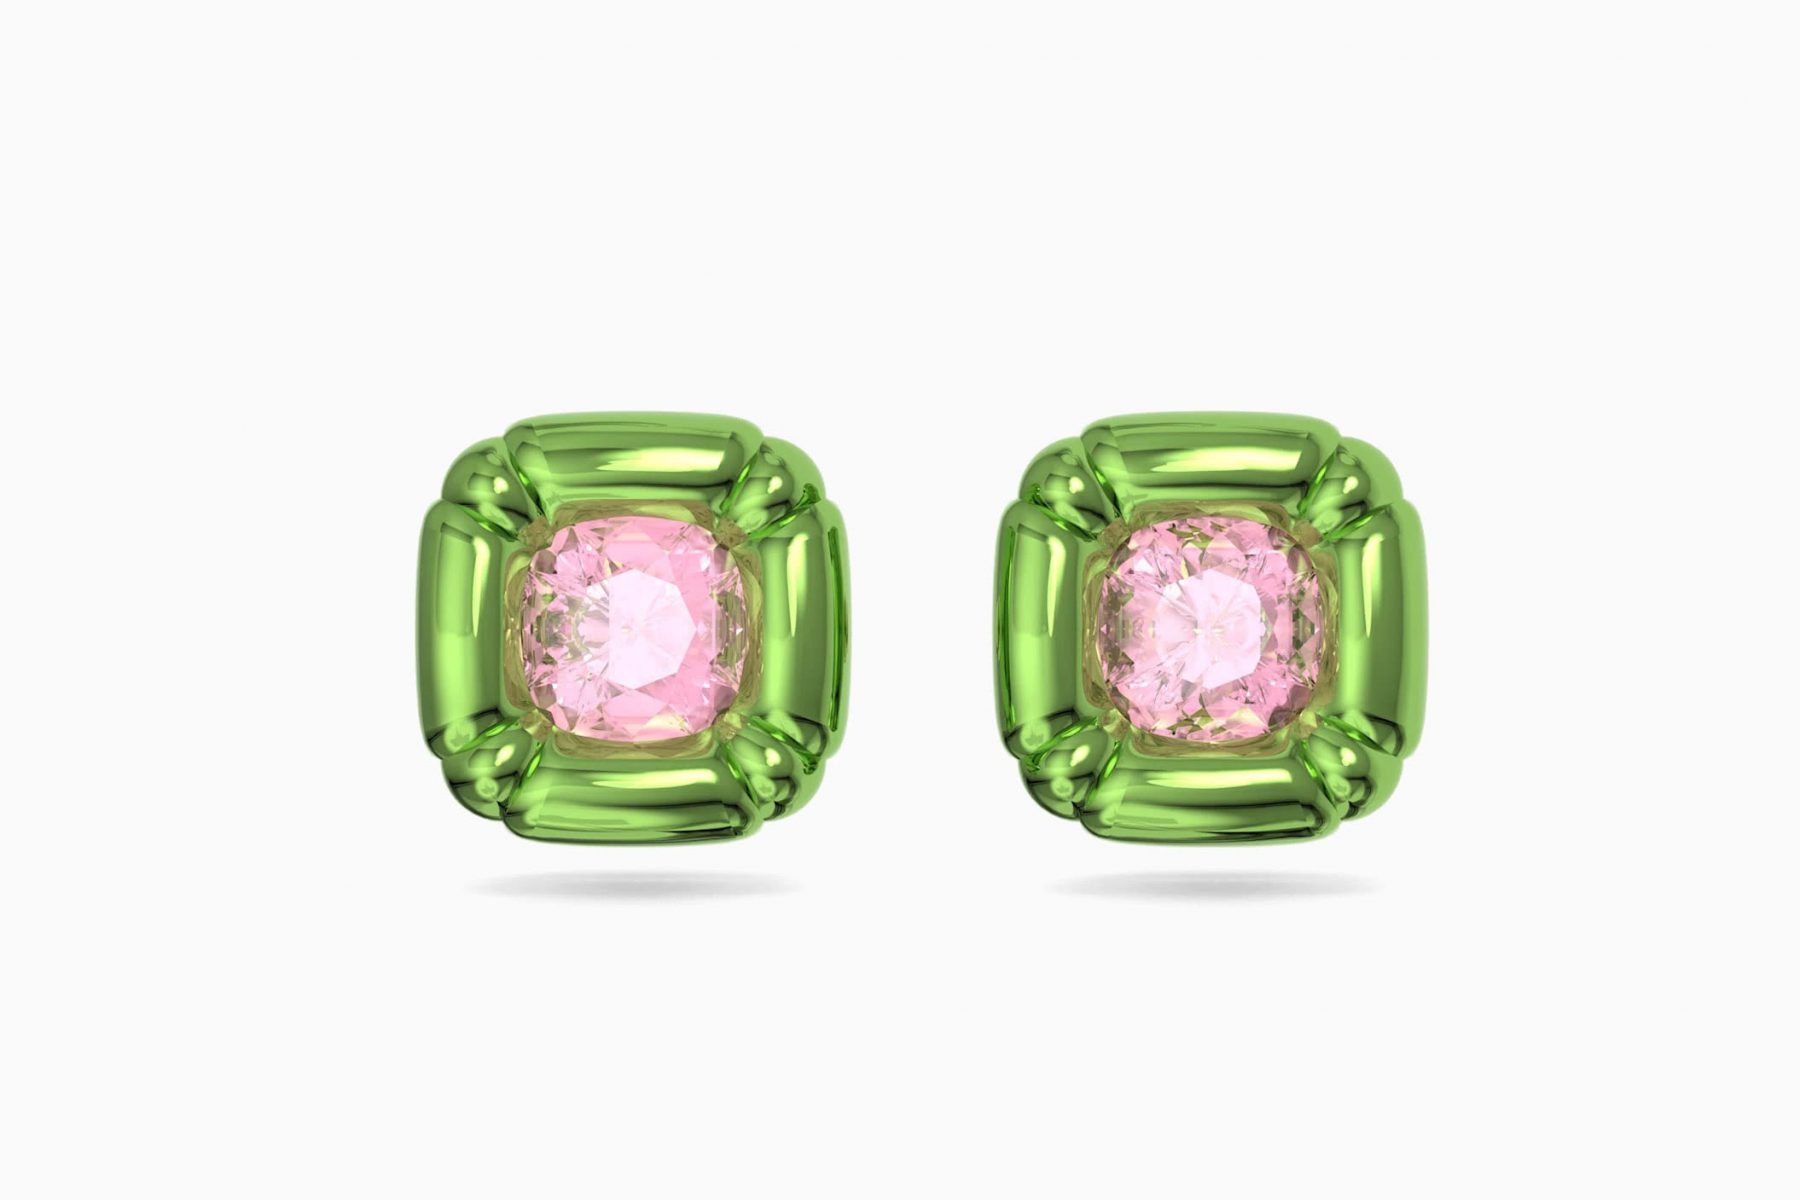 Swarovski dulcis stud earrings collection review - Luxe Digital